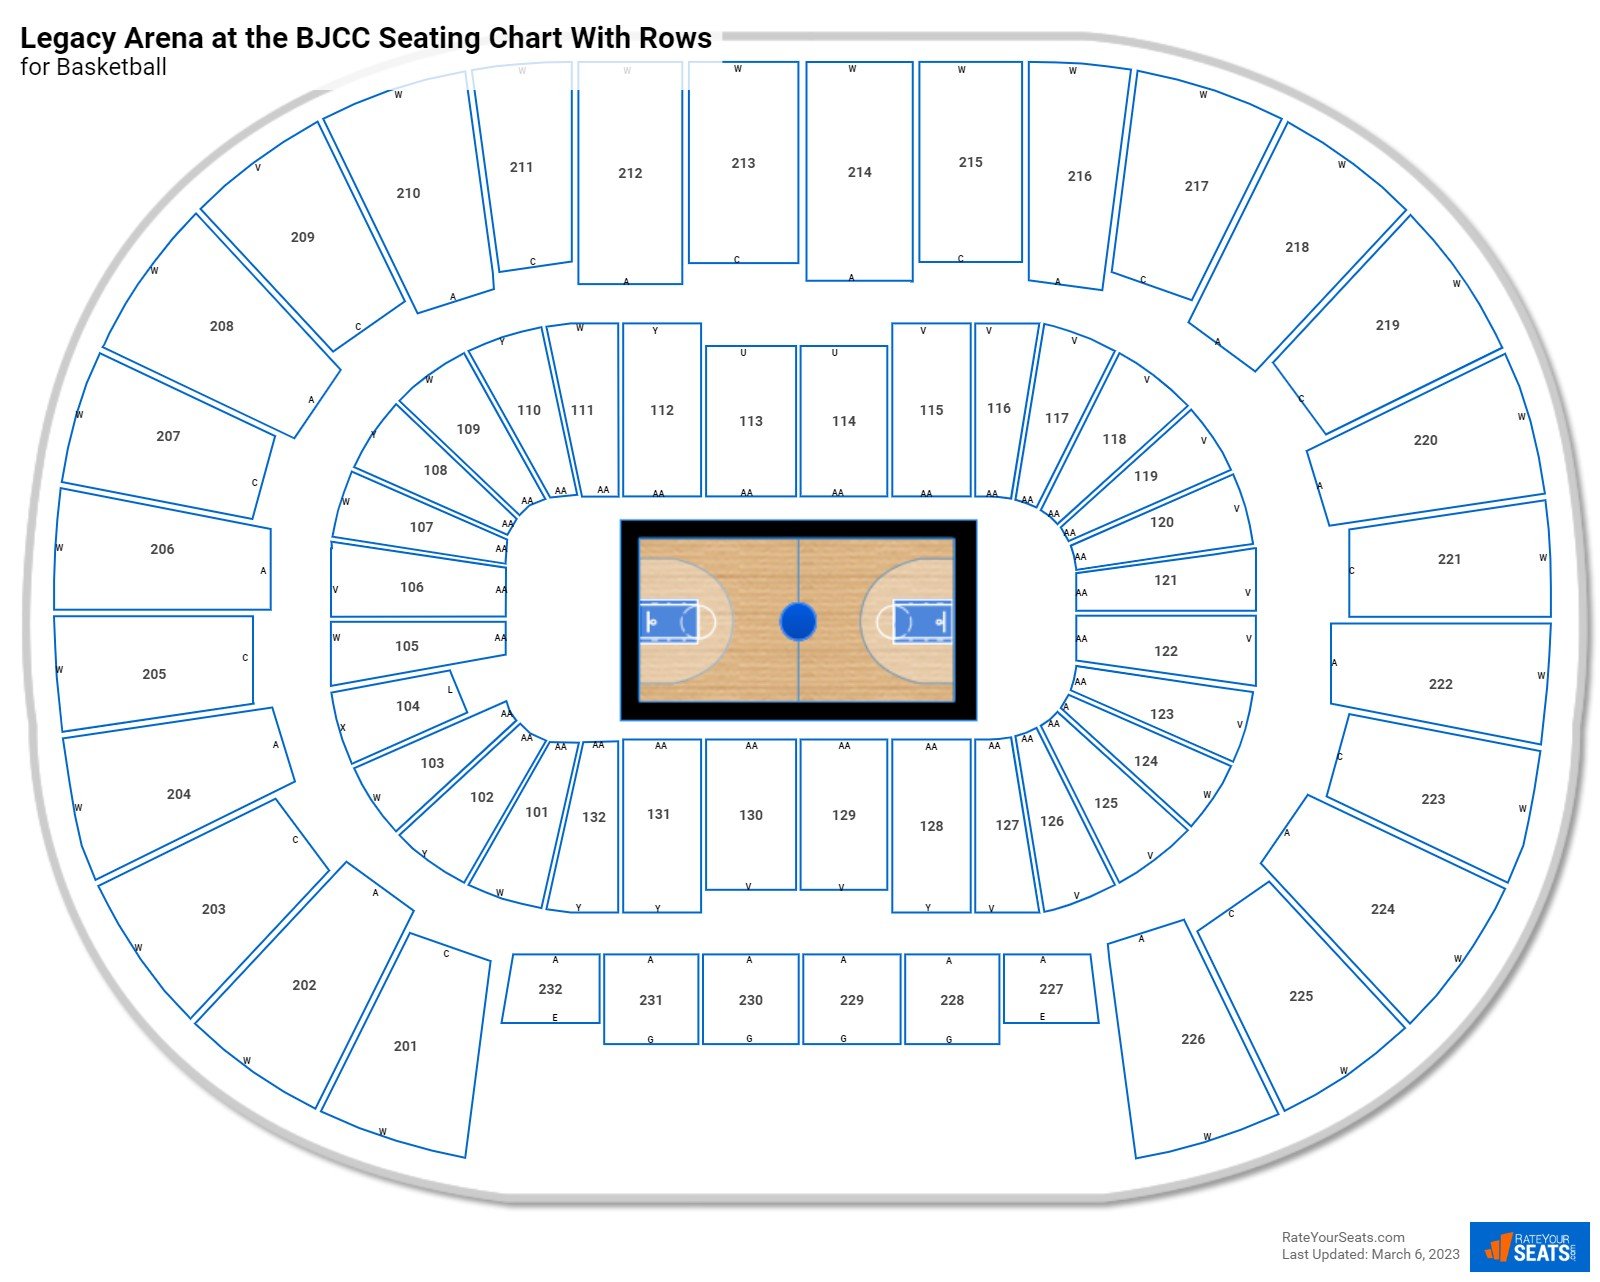 Legacy Arena at the BJCC seating chart with row numbers